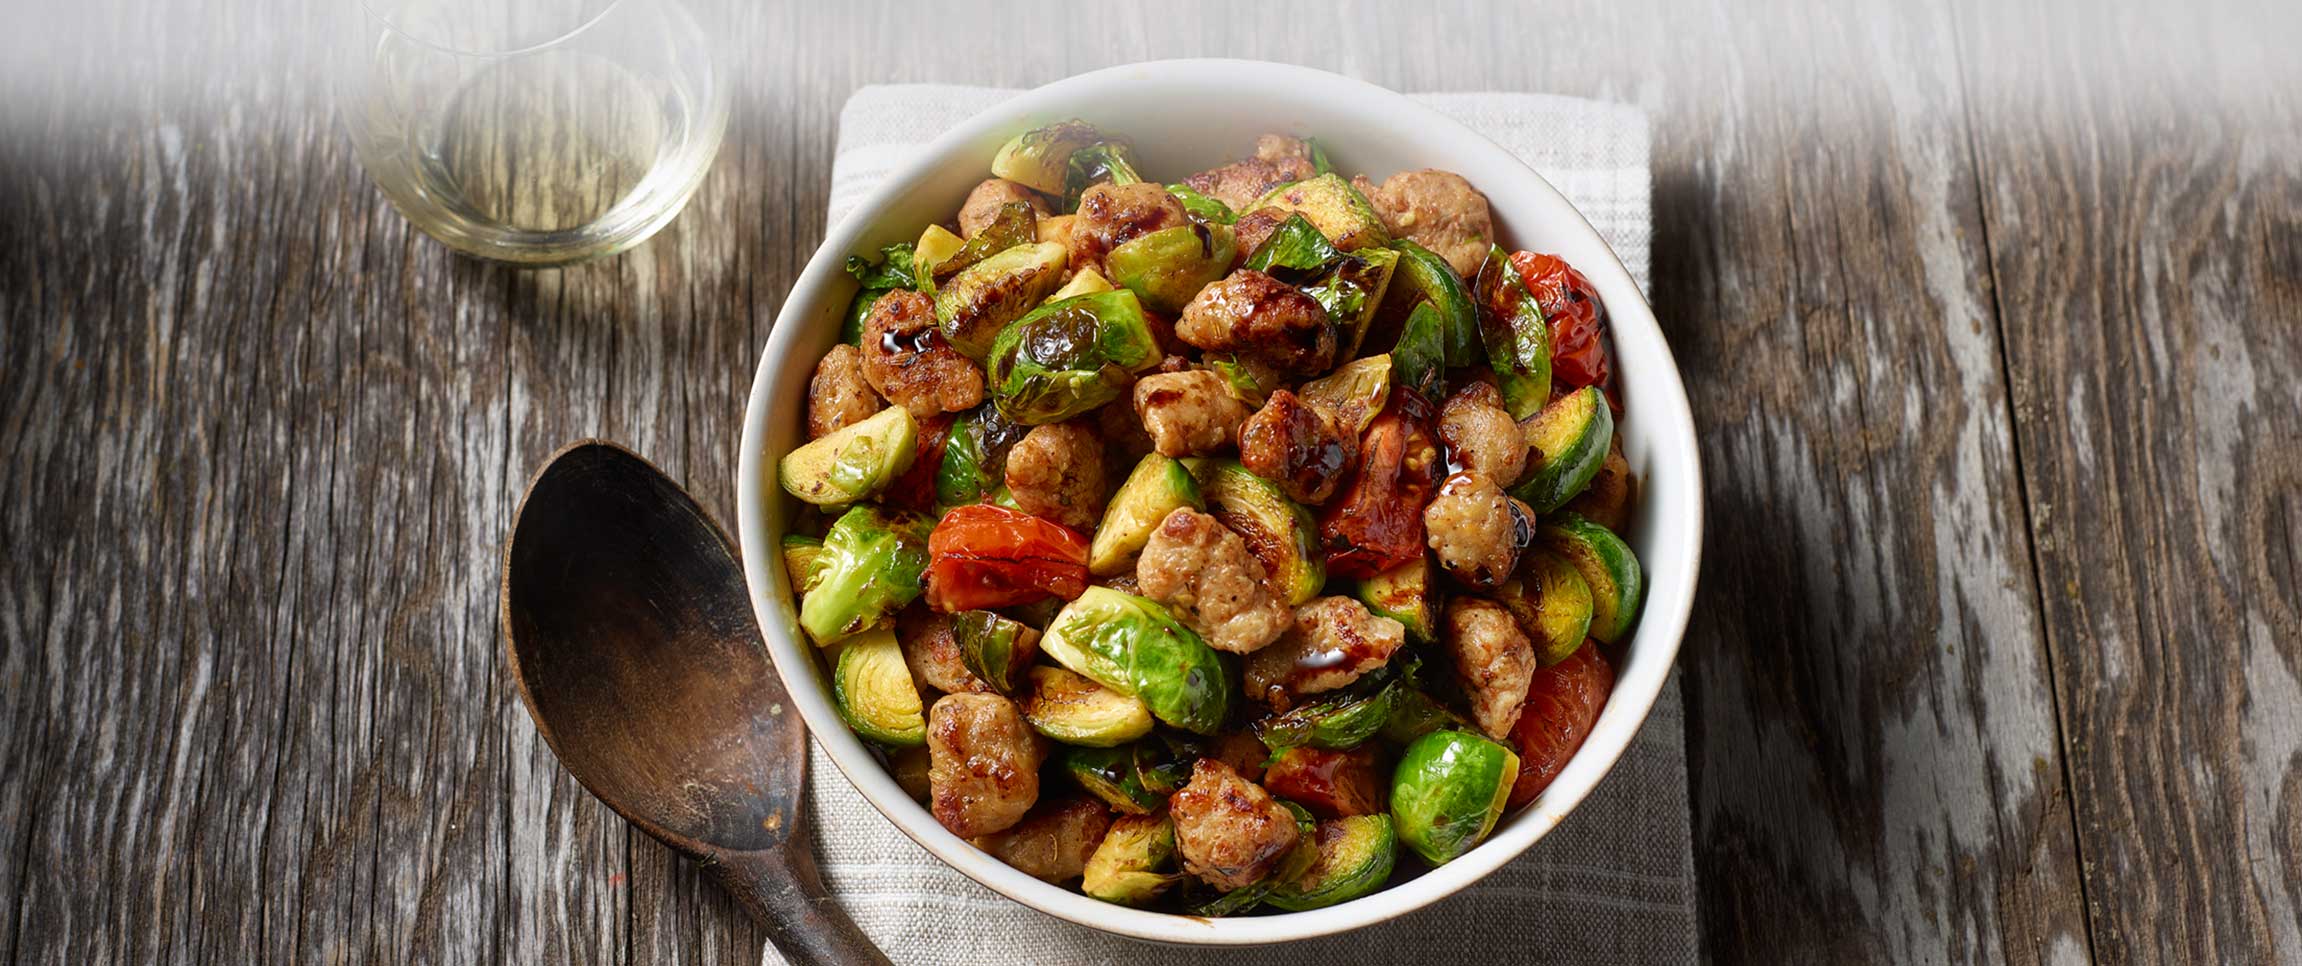 Sausage and Sprouts